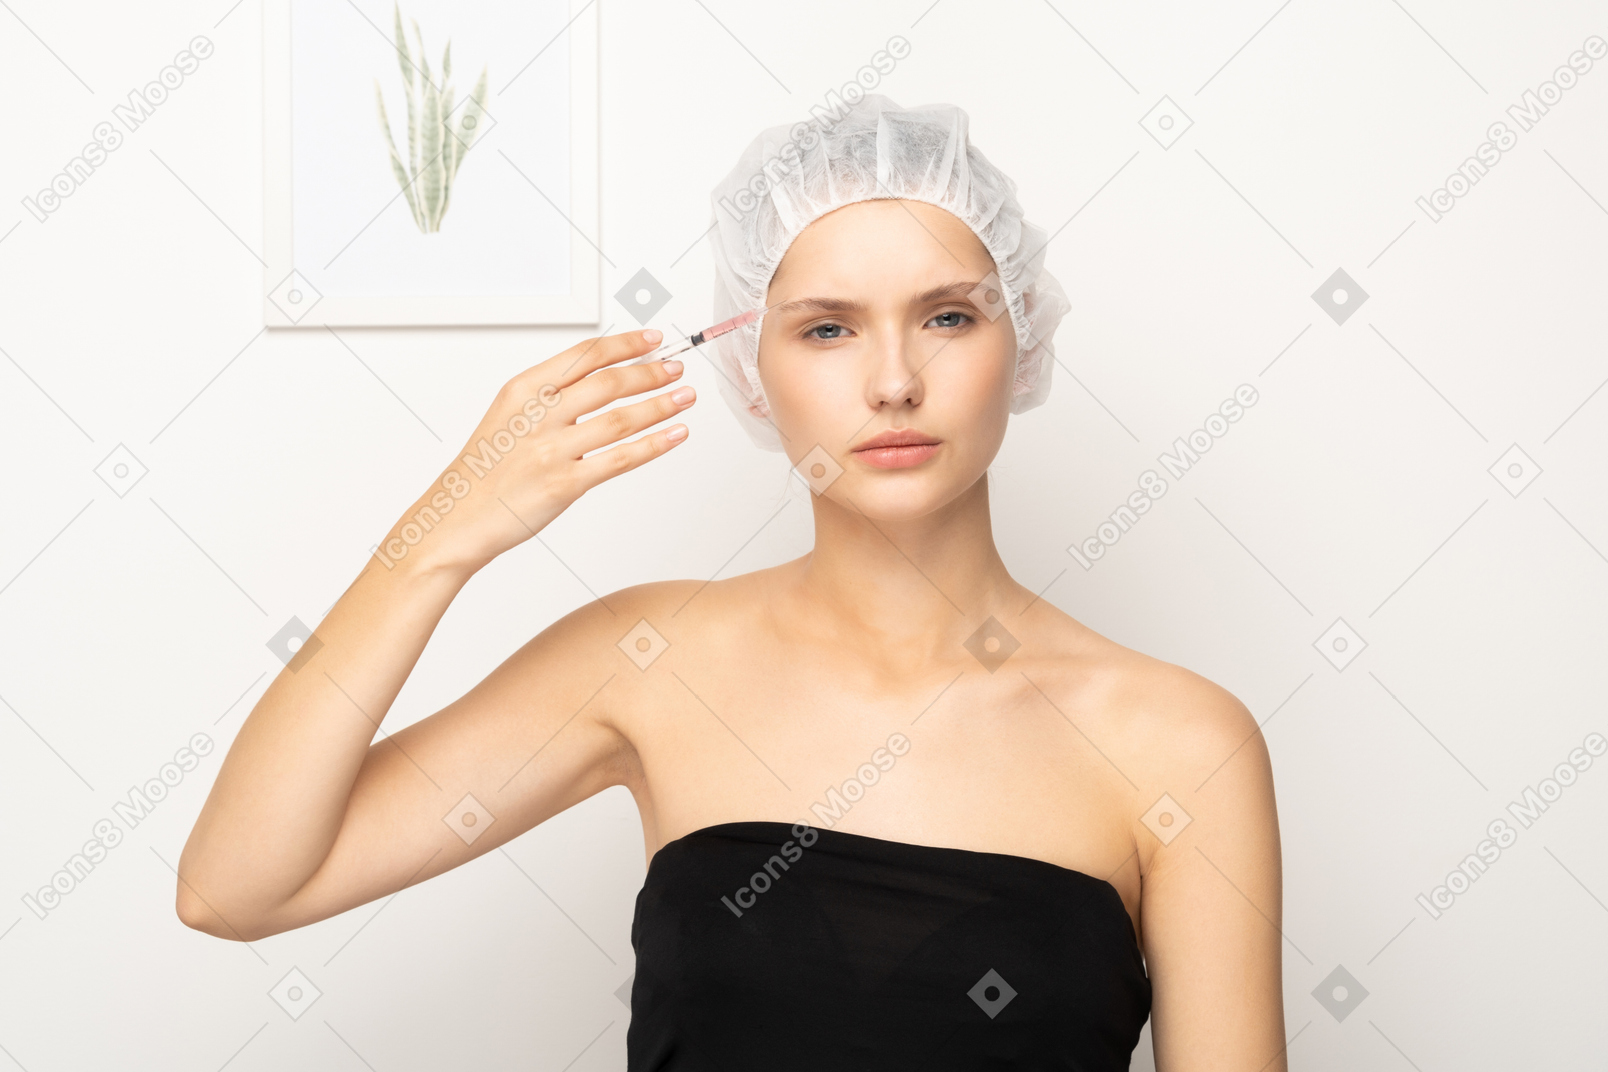 Woman making injection to her face